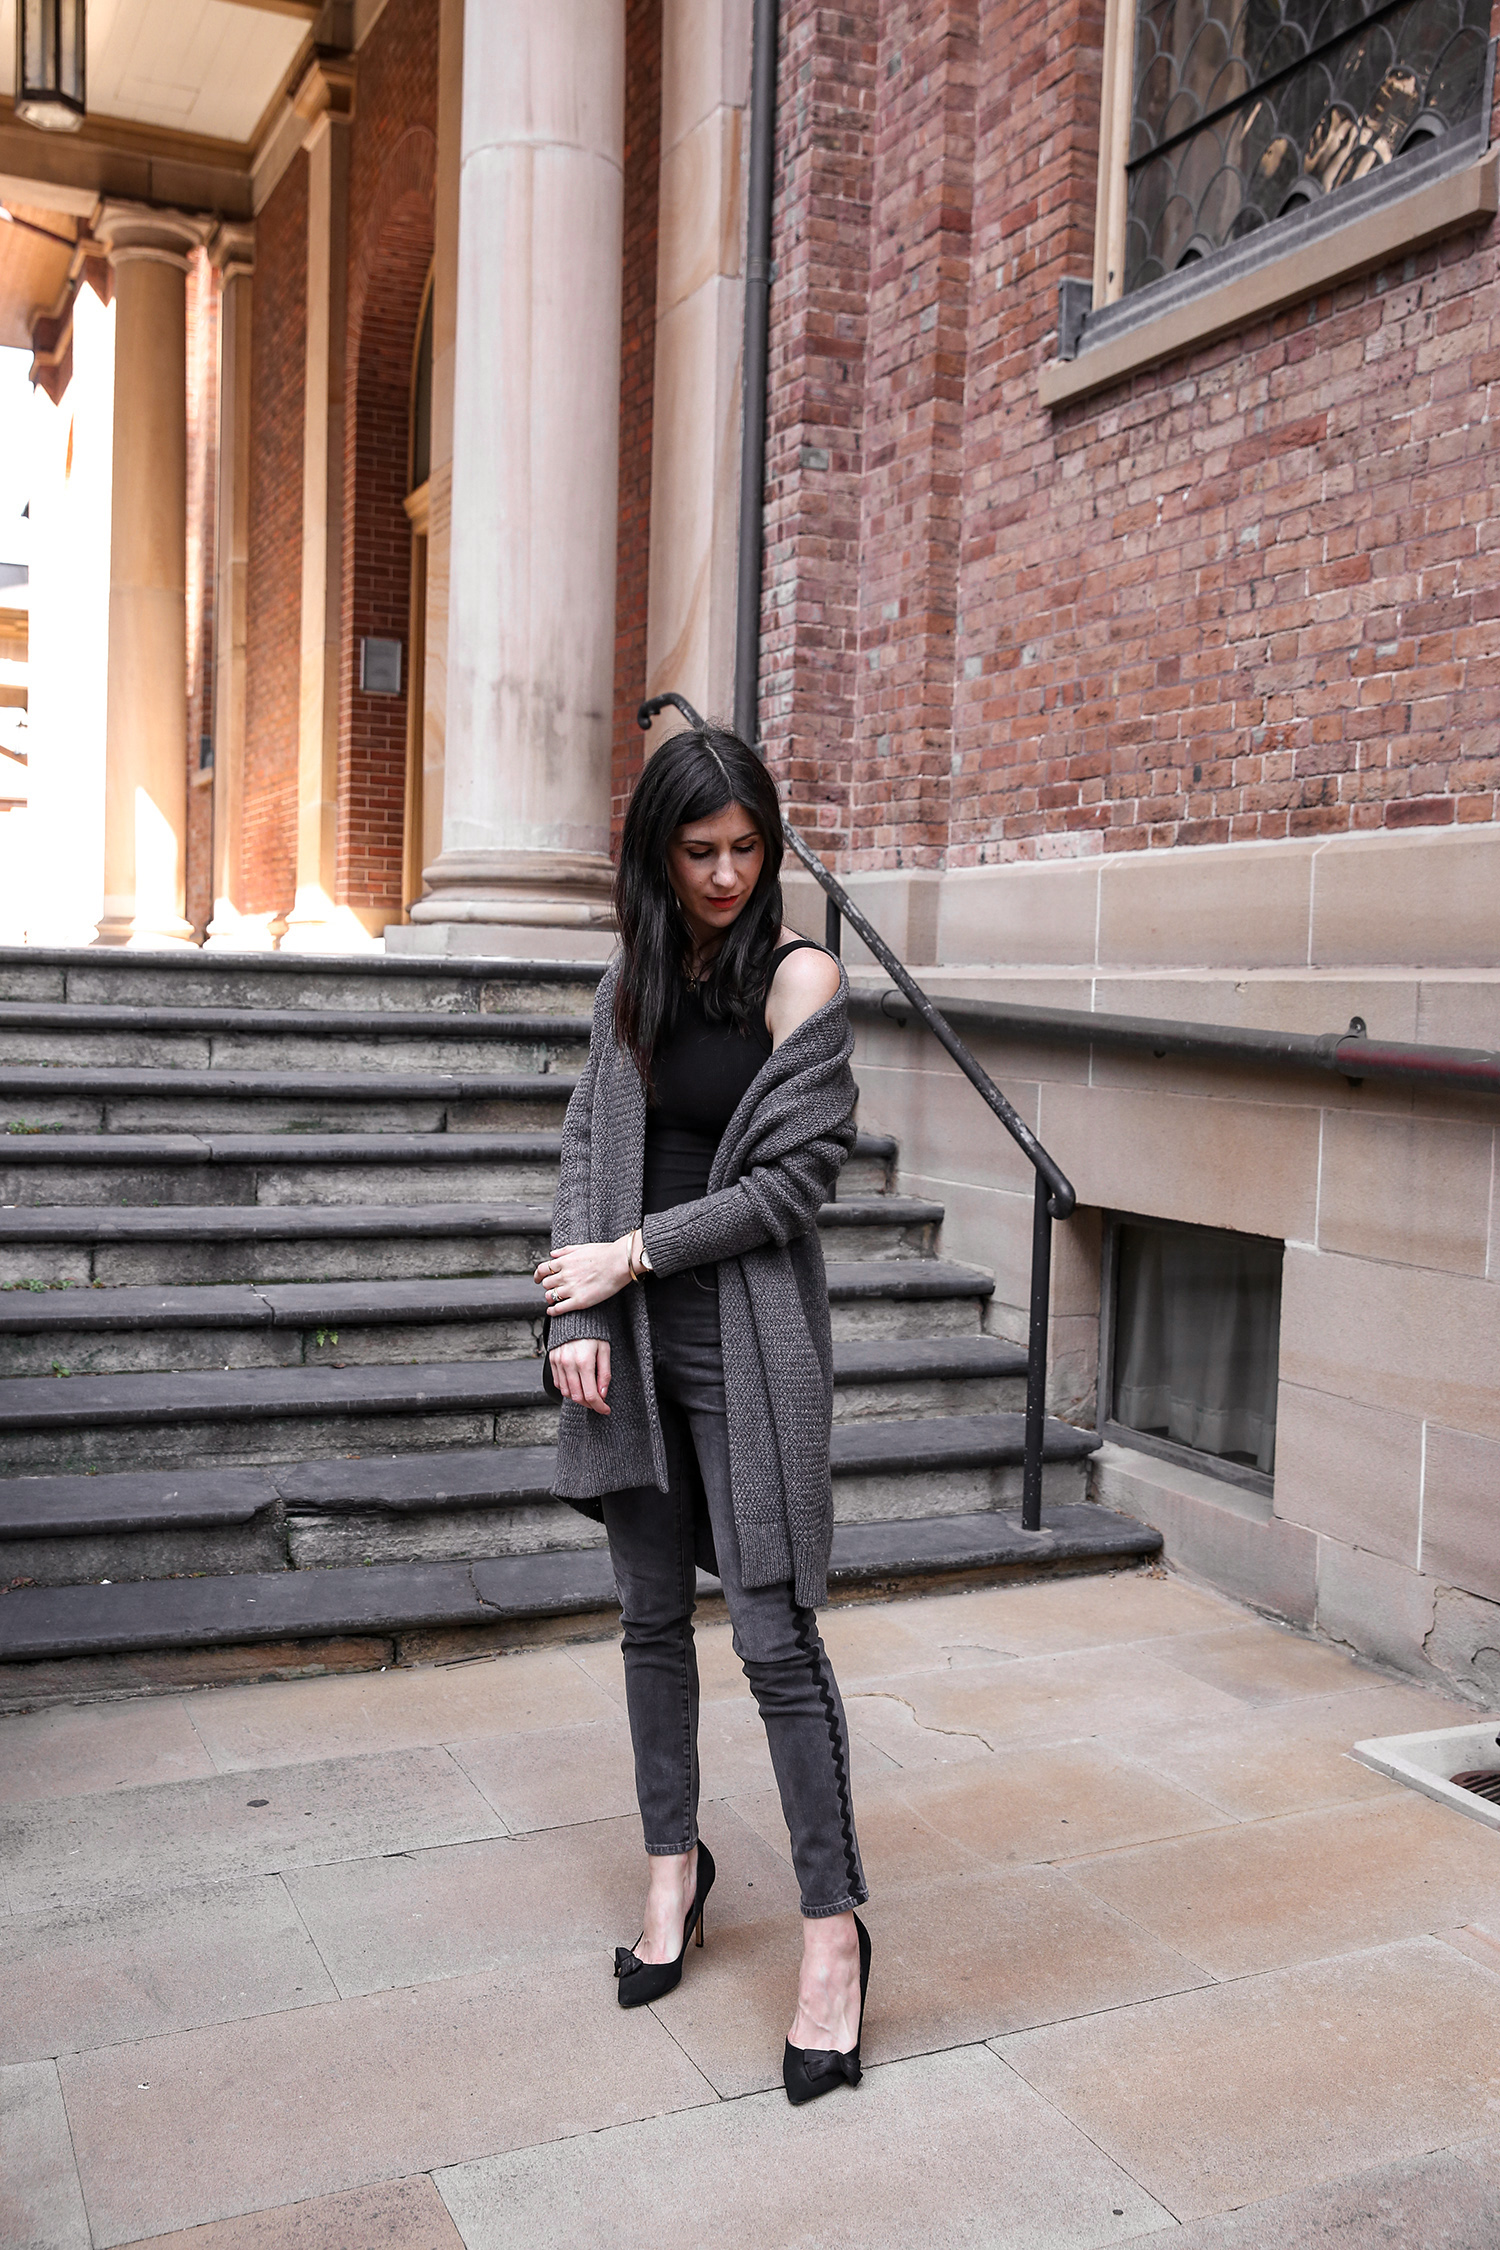 Jamie Lee of Mademoiselle wearing a head to toe black outfit